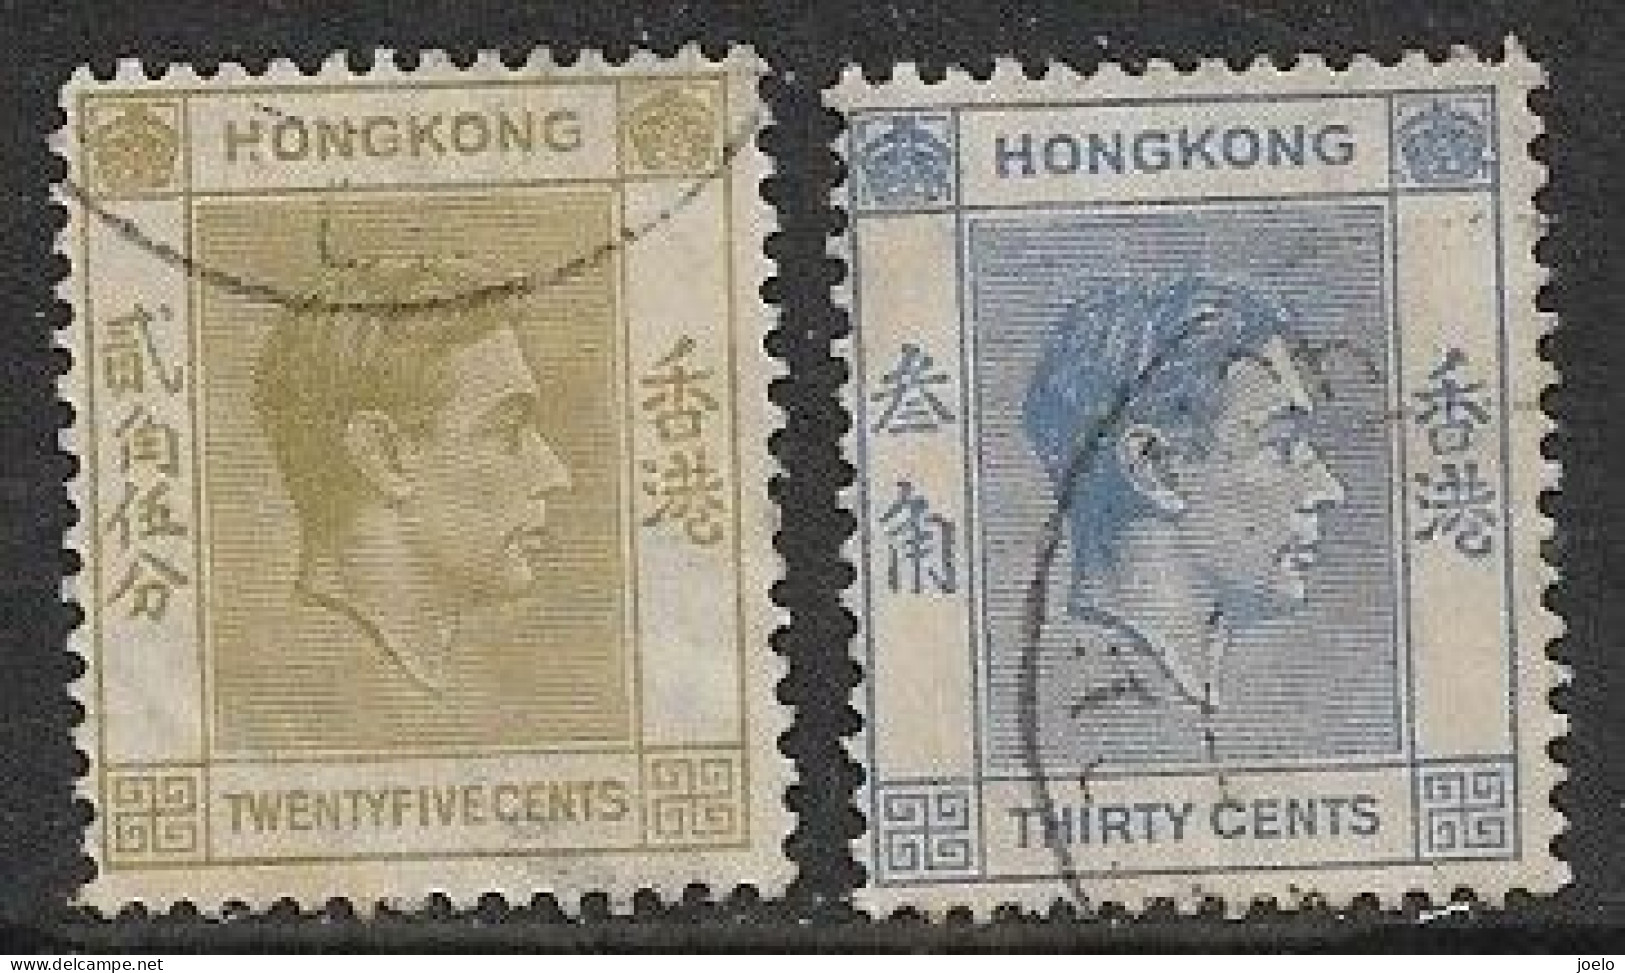 HONG KONG KGVl 1938 DEFINITIVES 25c OLIVE & 30c BLUE PAIR - Used Stamps